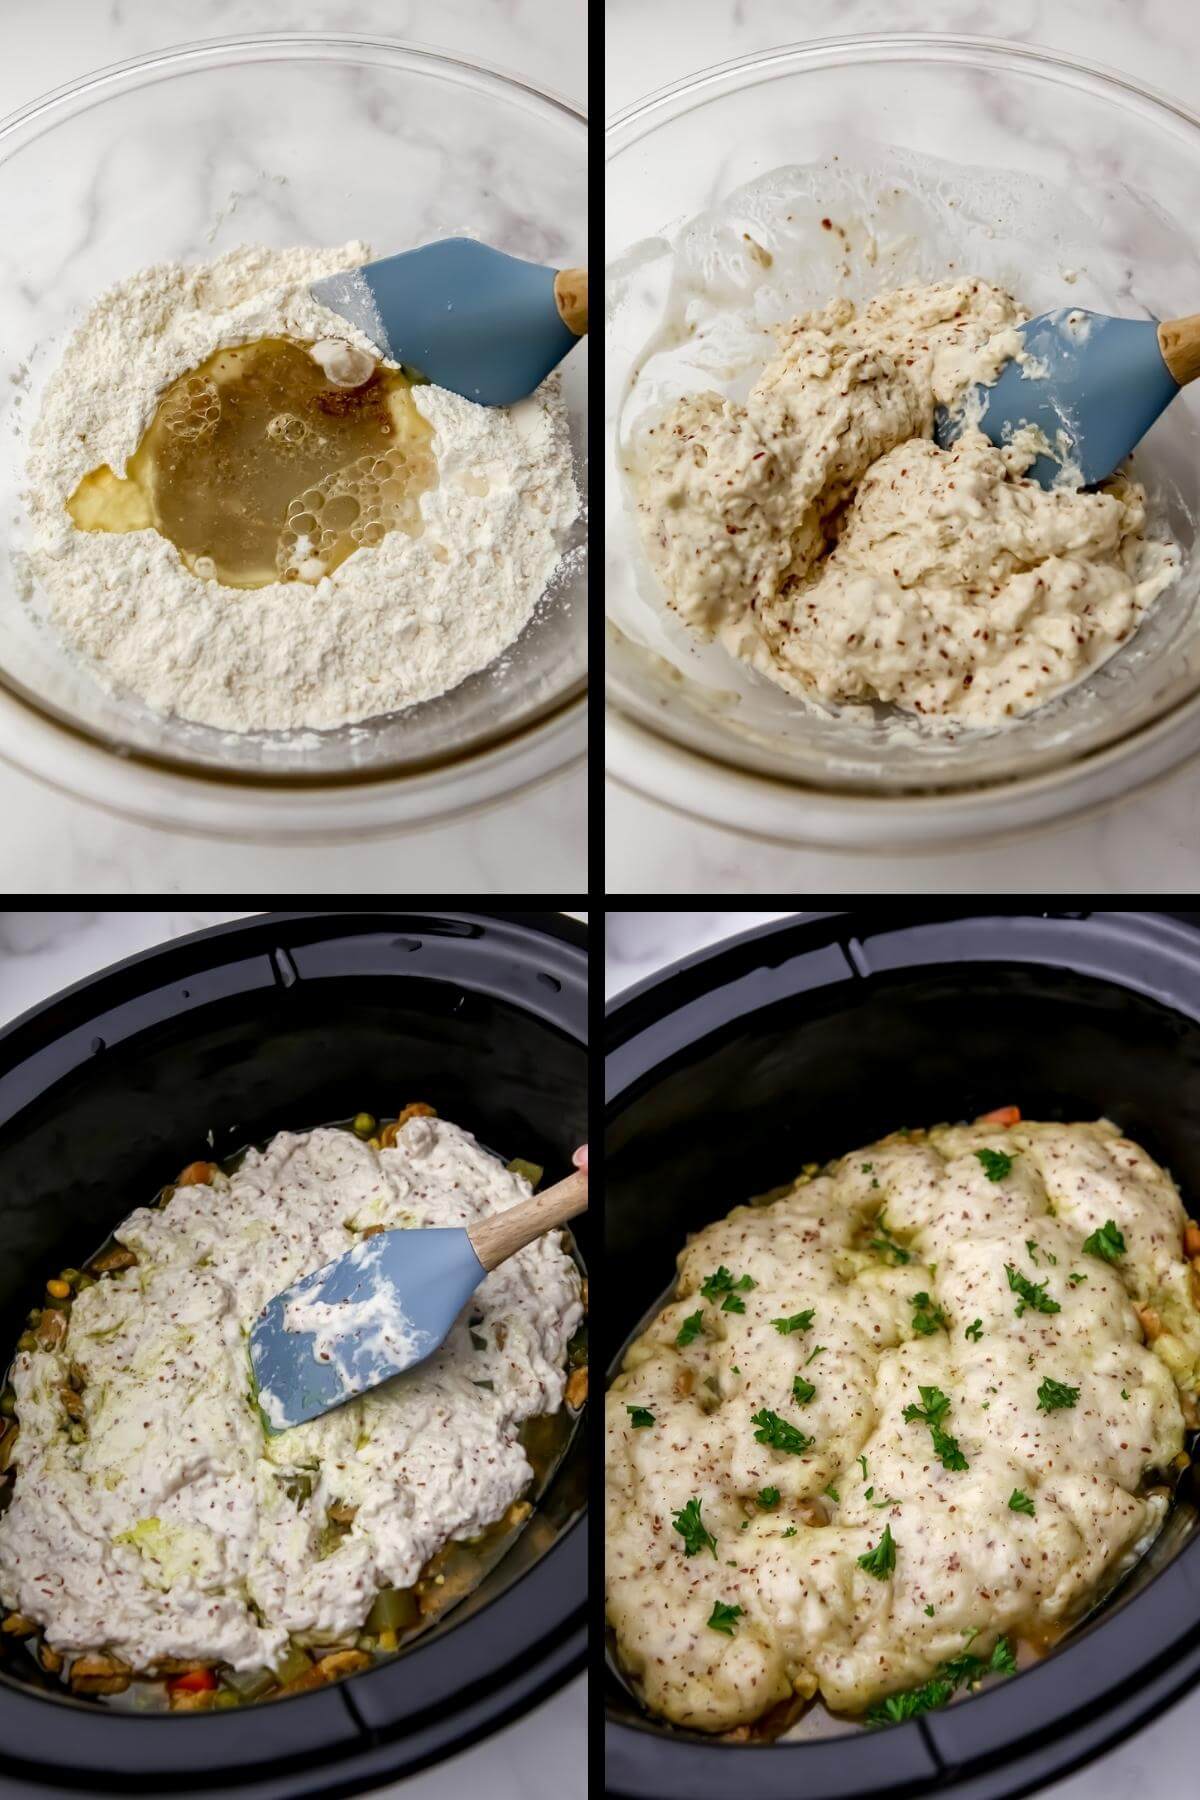 A collage of 4 images showing the process steps for making a biscuit topping for a pot pie.